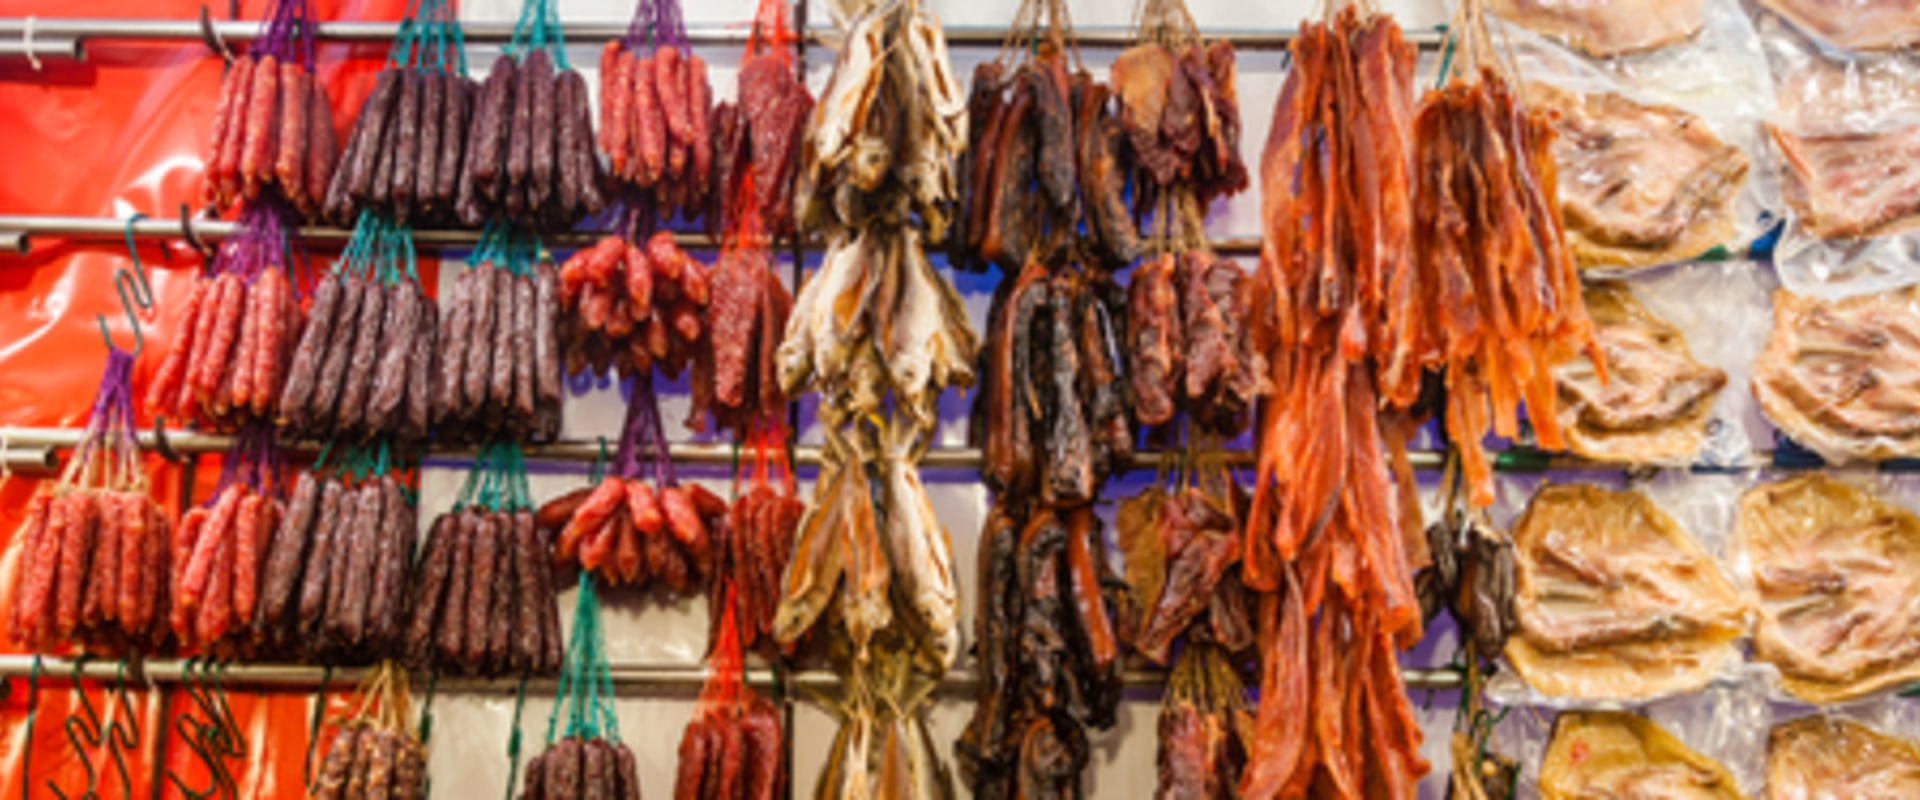 How is chinese sausage different?